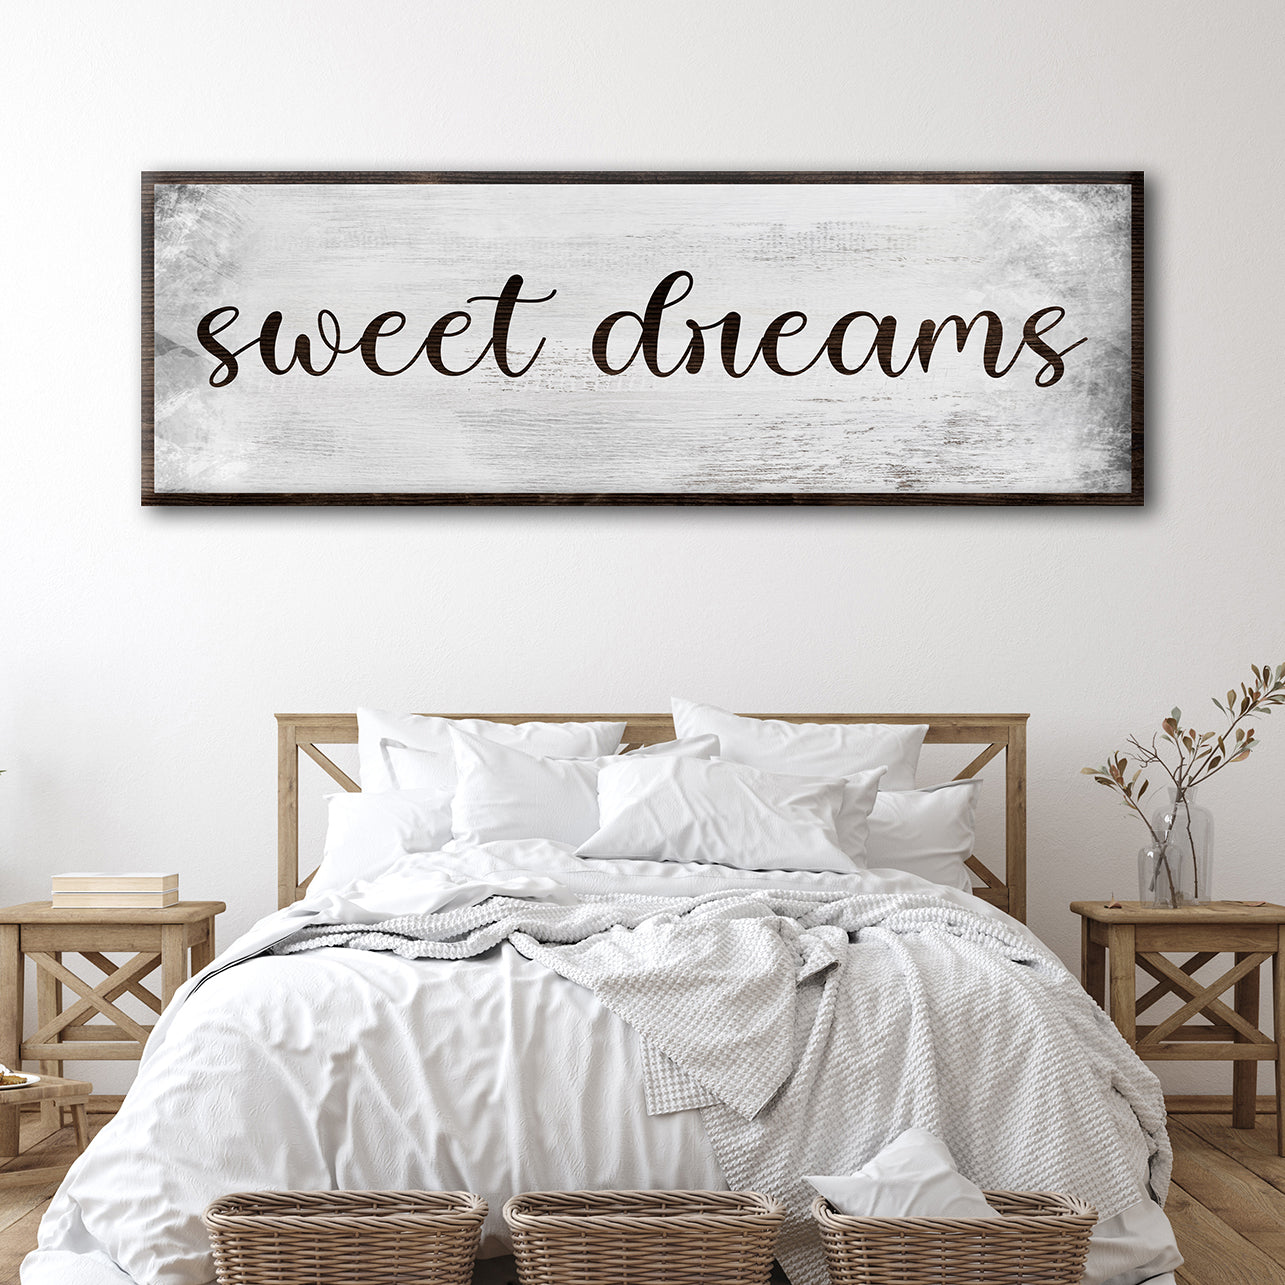 Sweet Dreams Bedroom Grunge Sign - Image by Tailored Canvases